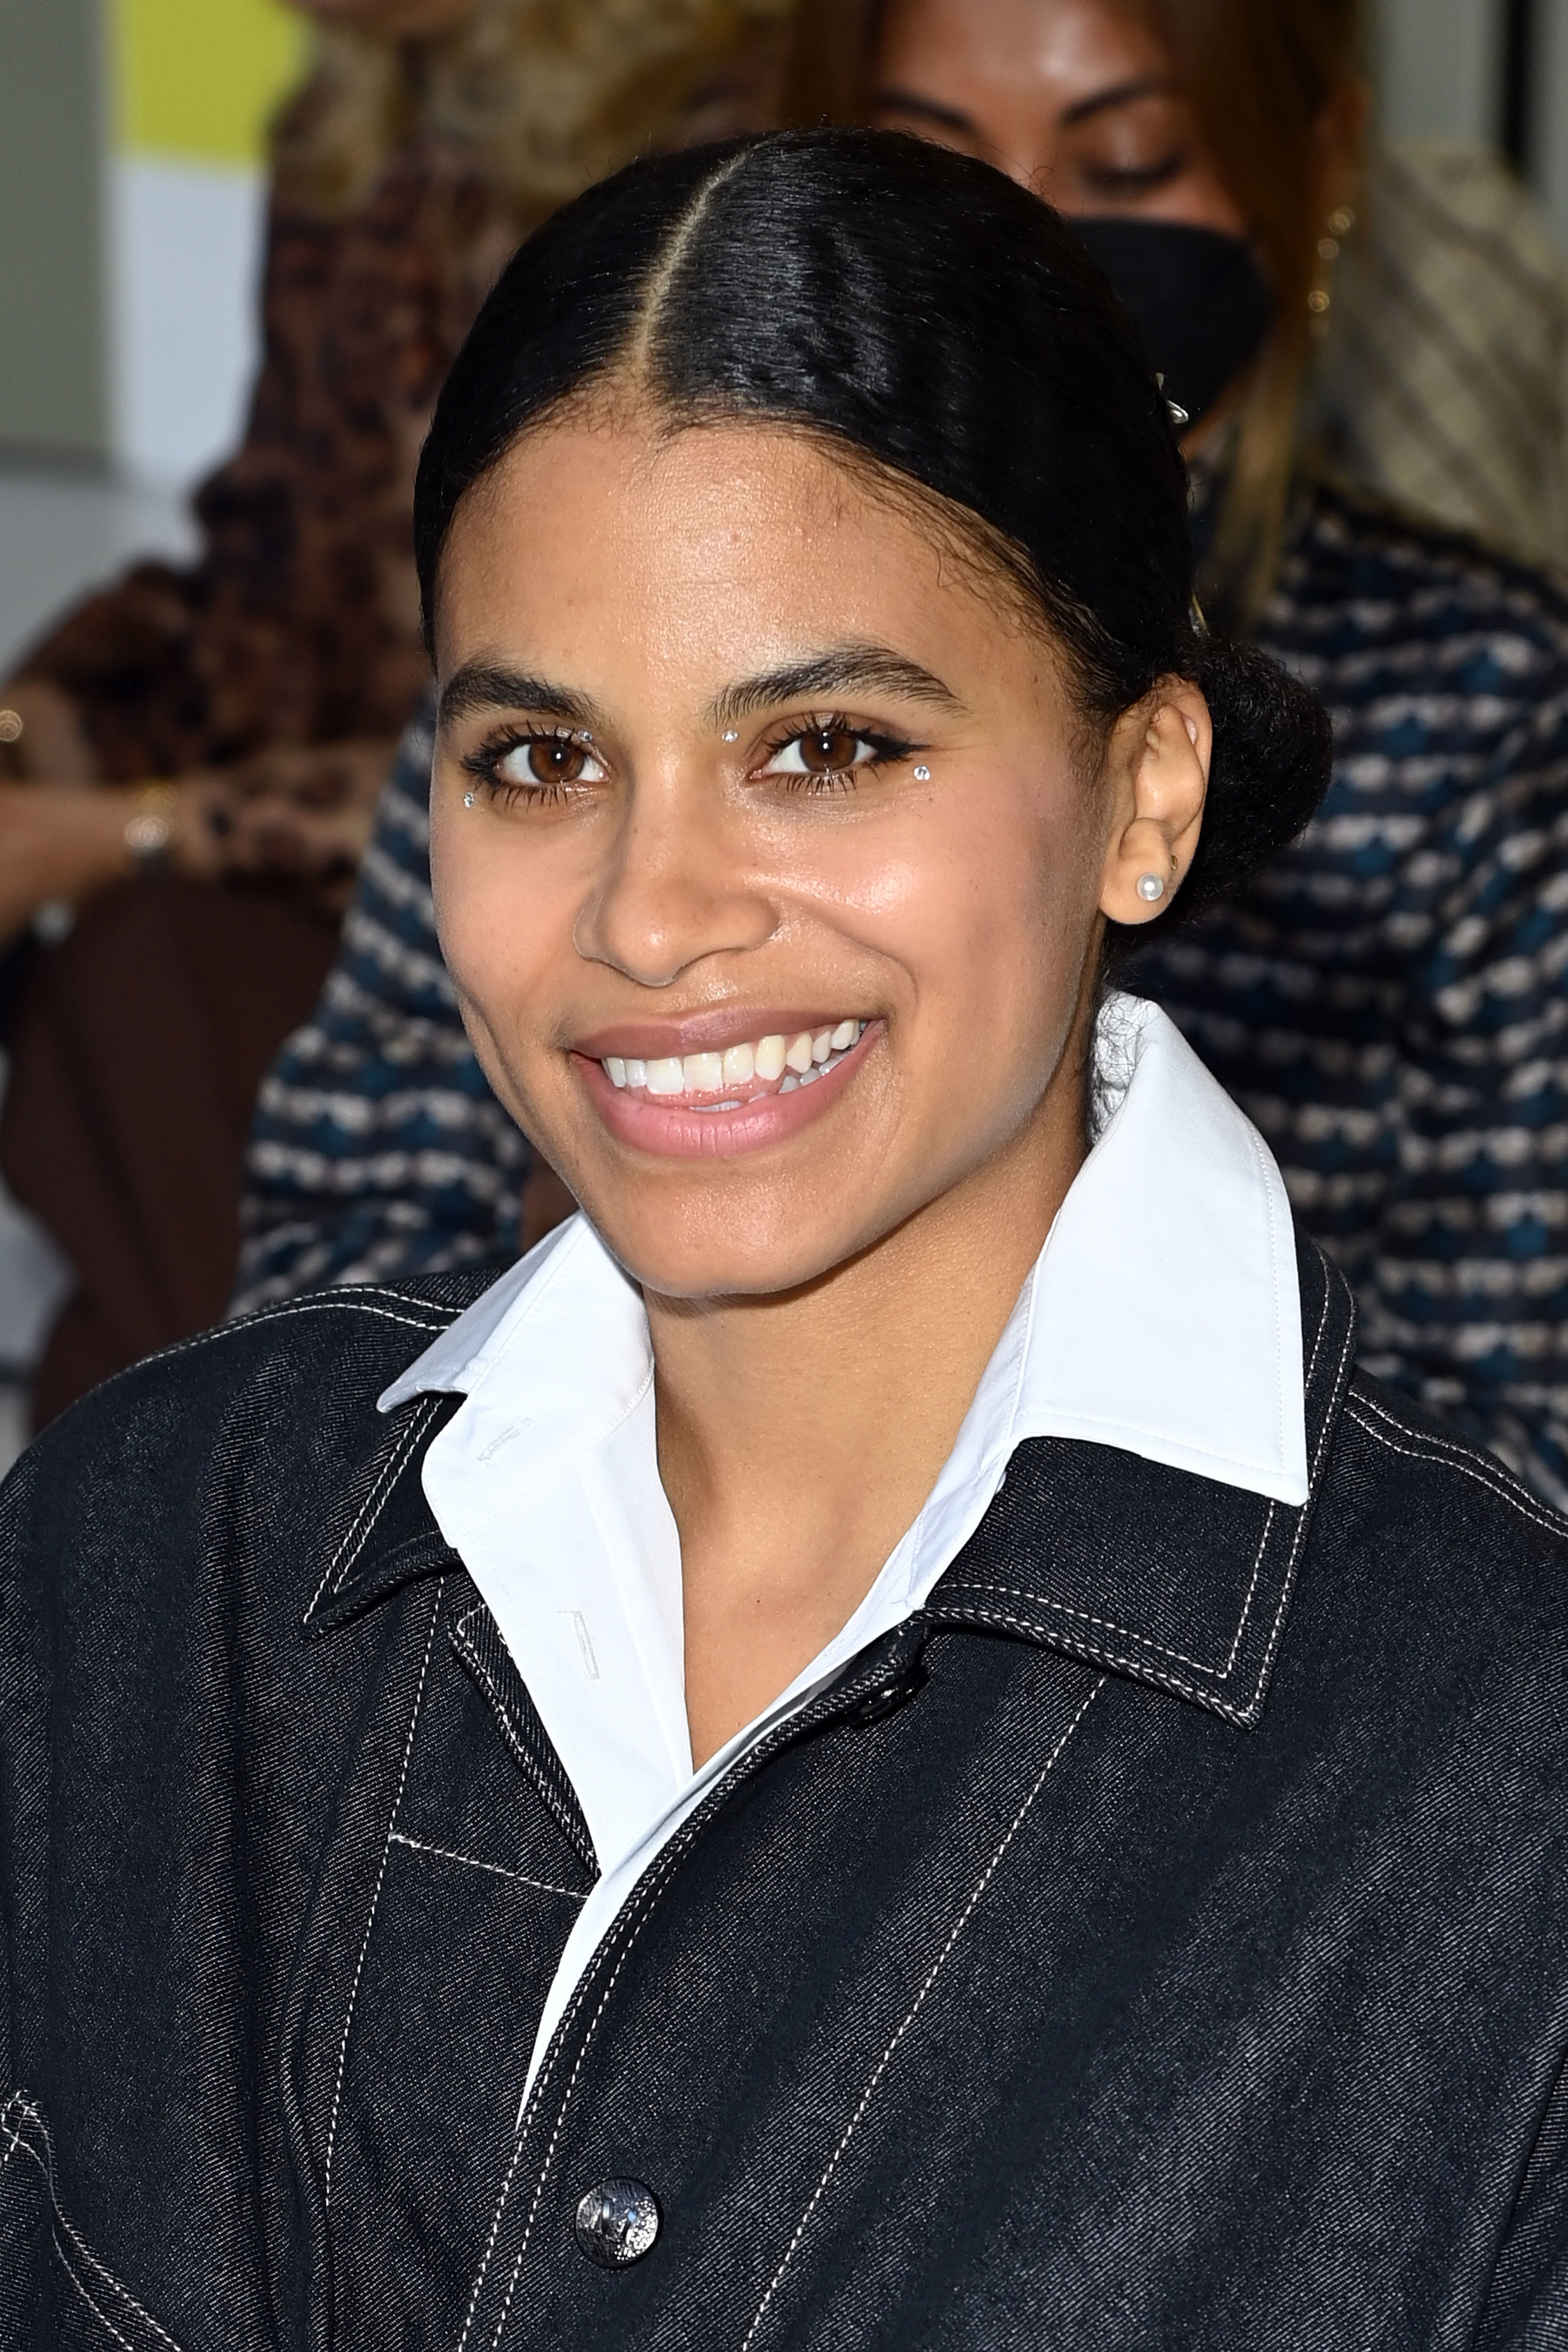 Zazie Beetz is seen on the front row of the Max Mara fashion show during the Milan Fashion Week - Spring / Summer 2022 on September 23, 2021 in Milan, Italy.